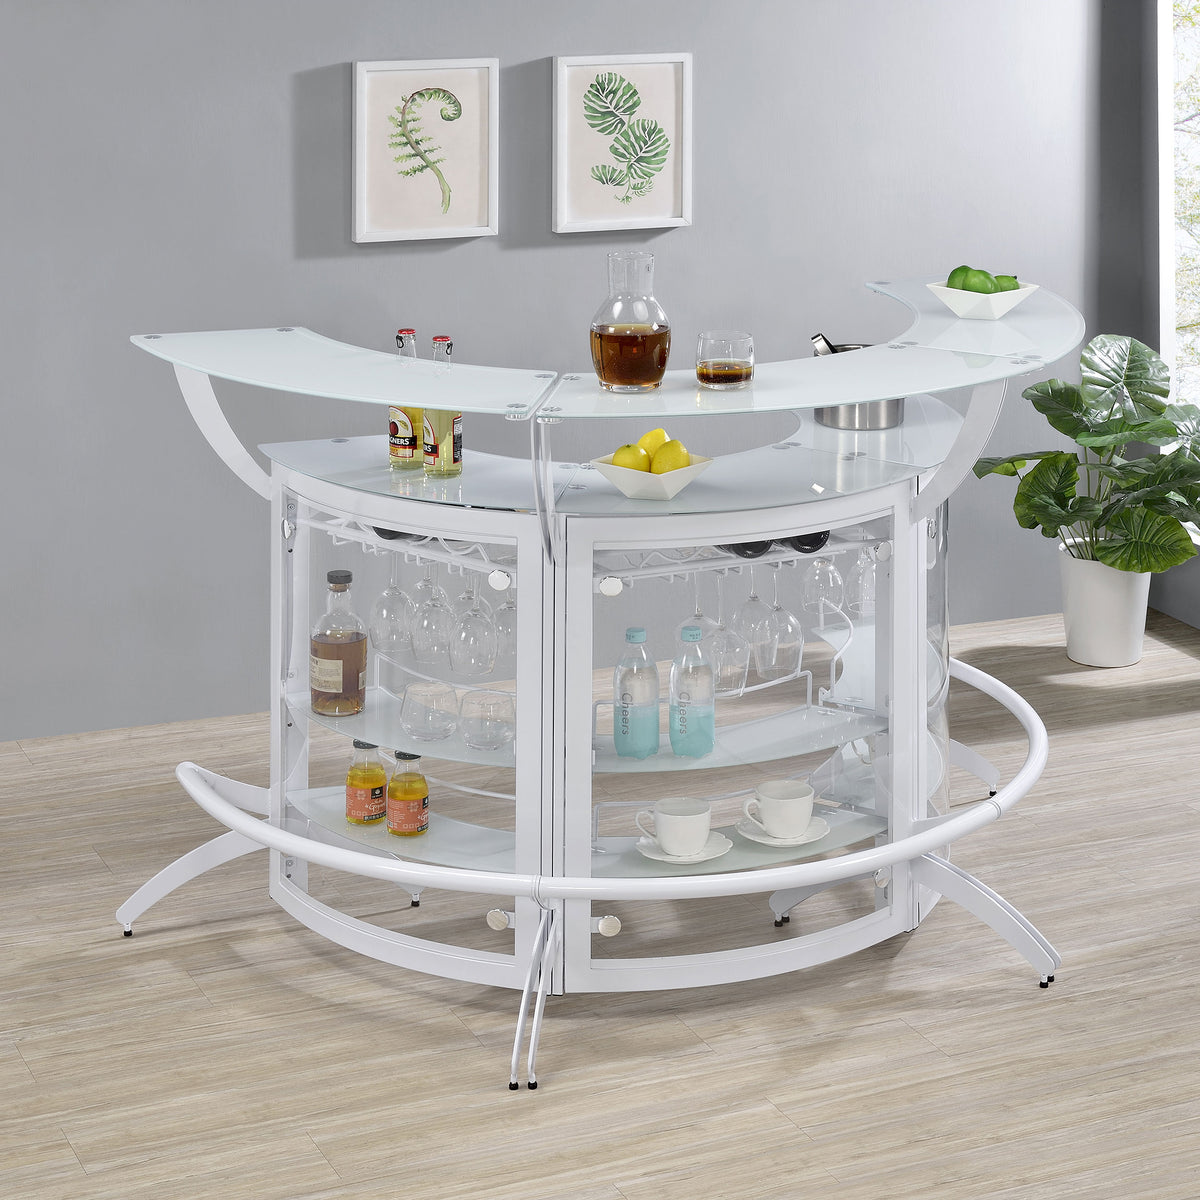 Dallas 2-shelf Curved Home Bar White and Frosted Glass (Set of 3) Dallas 2-shelf Curved Home Bar White and Frosted Glass (Set of 3) Half Price Furniture